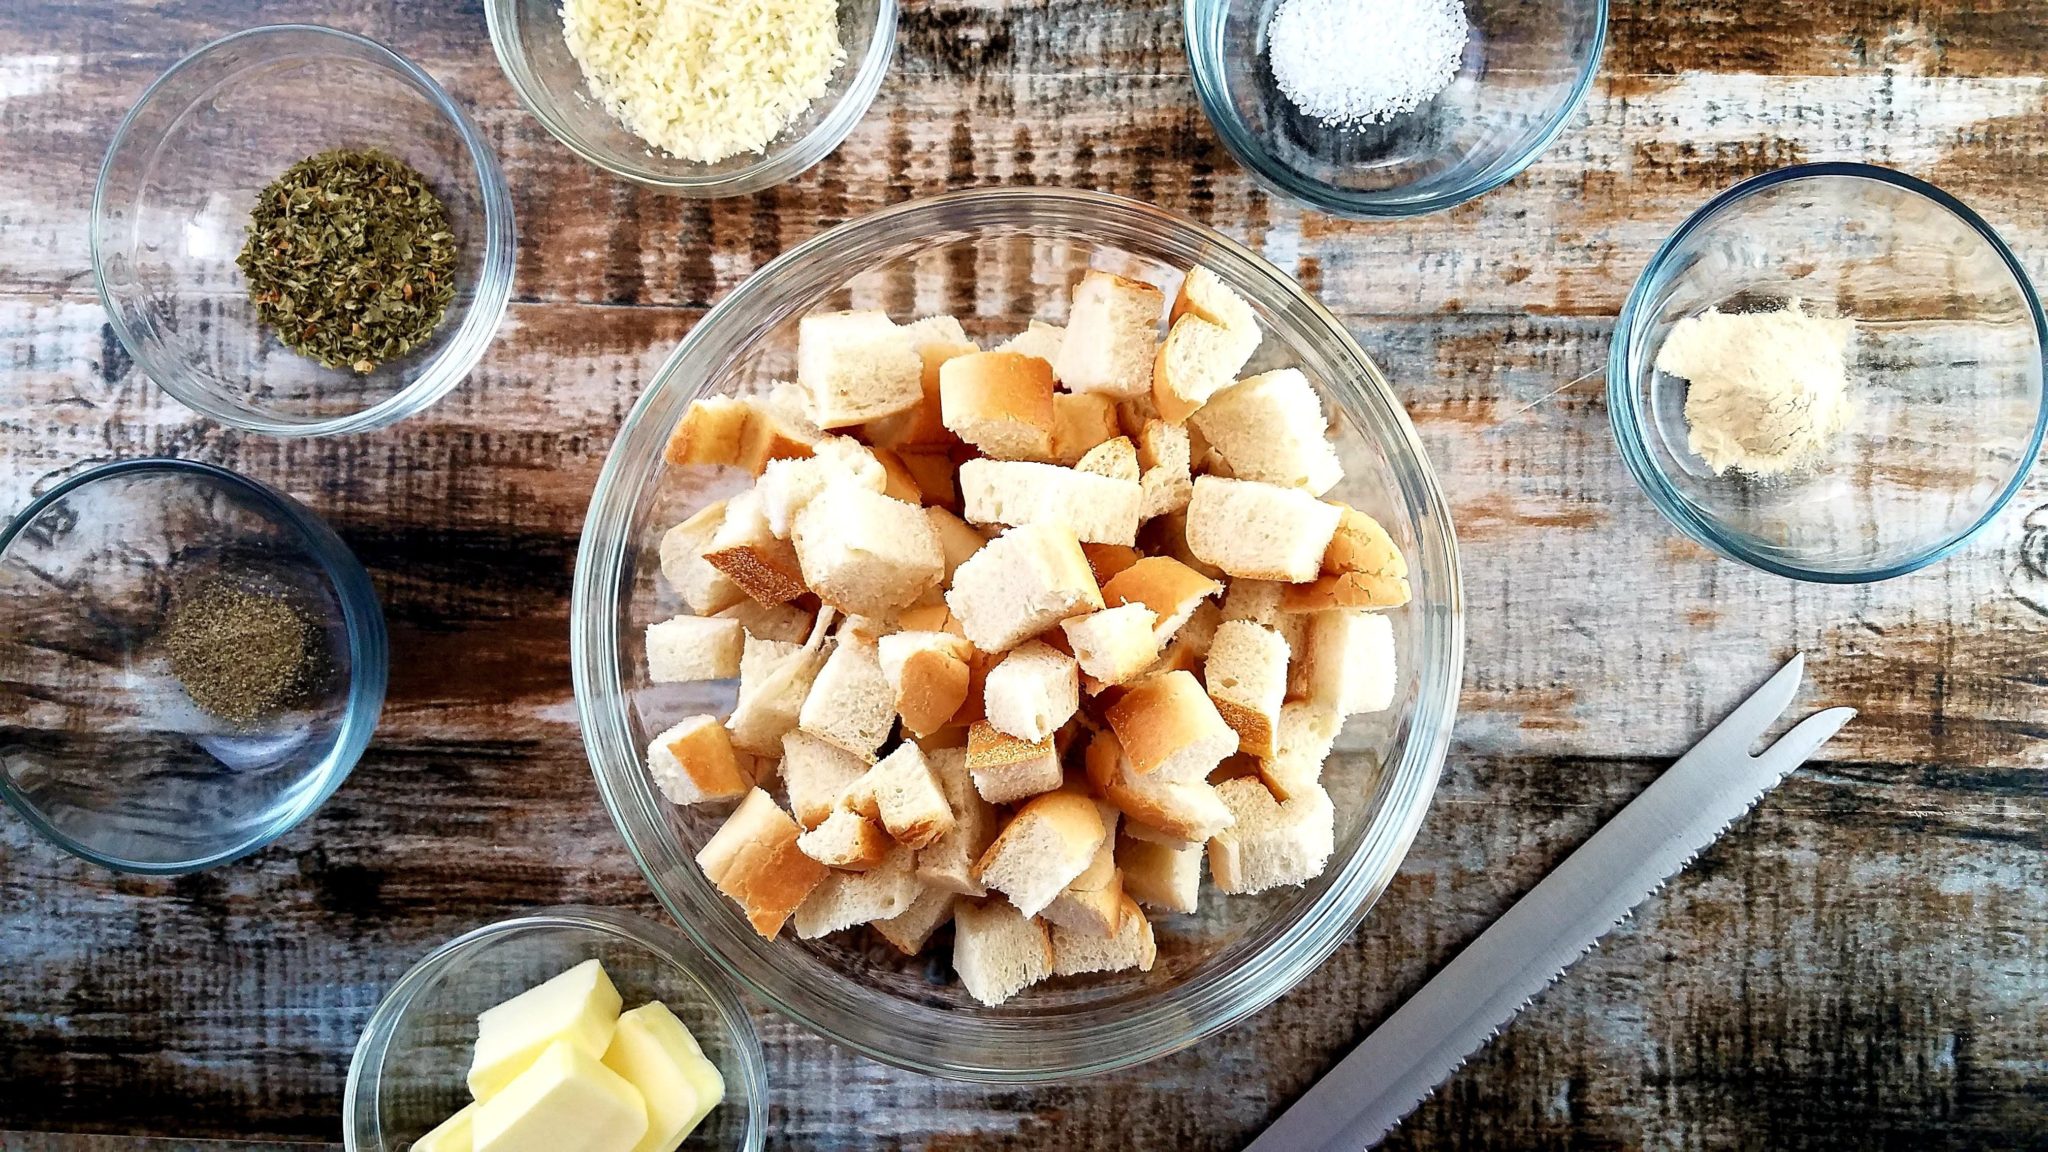 Ingredients for homemade croutons